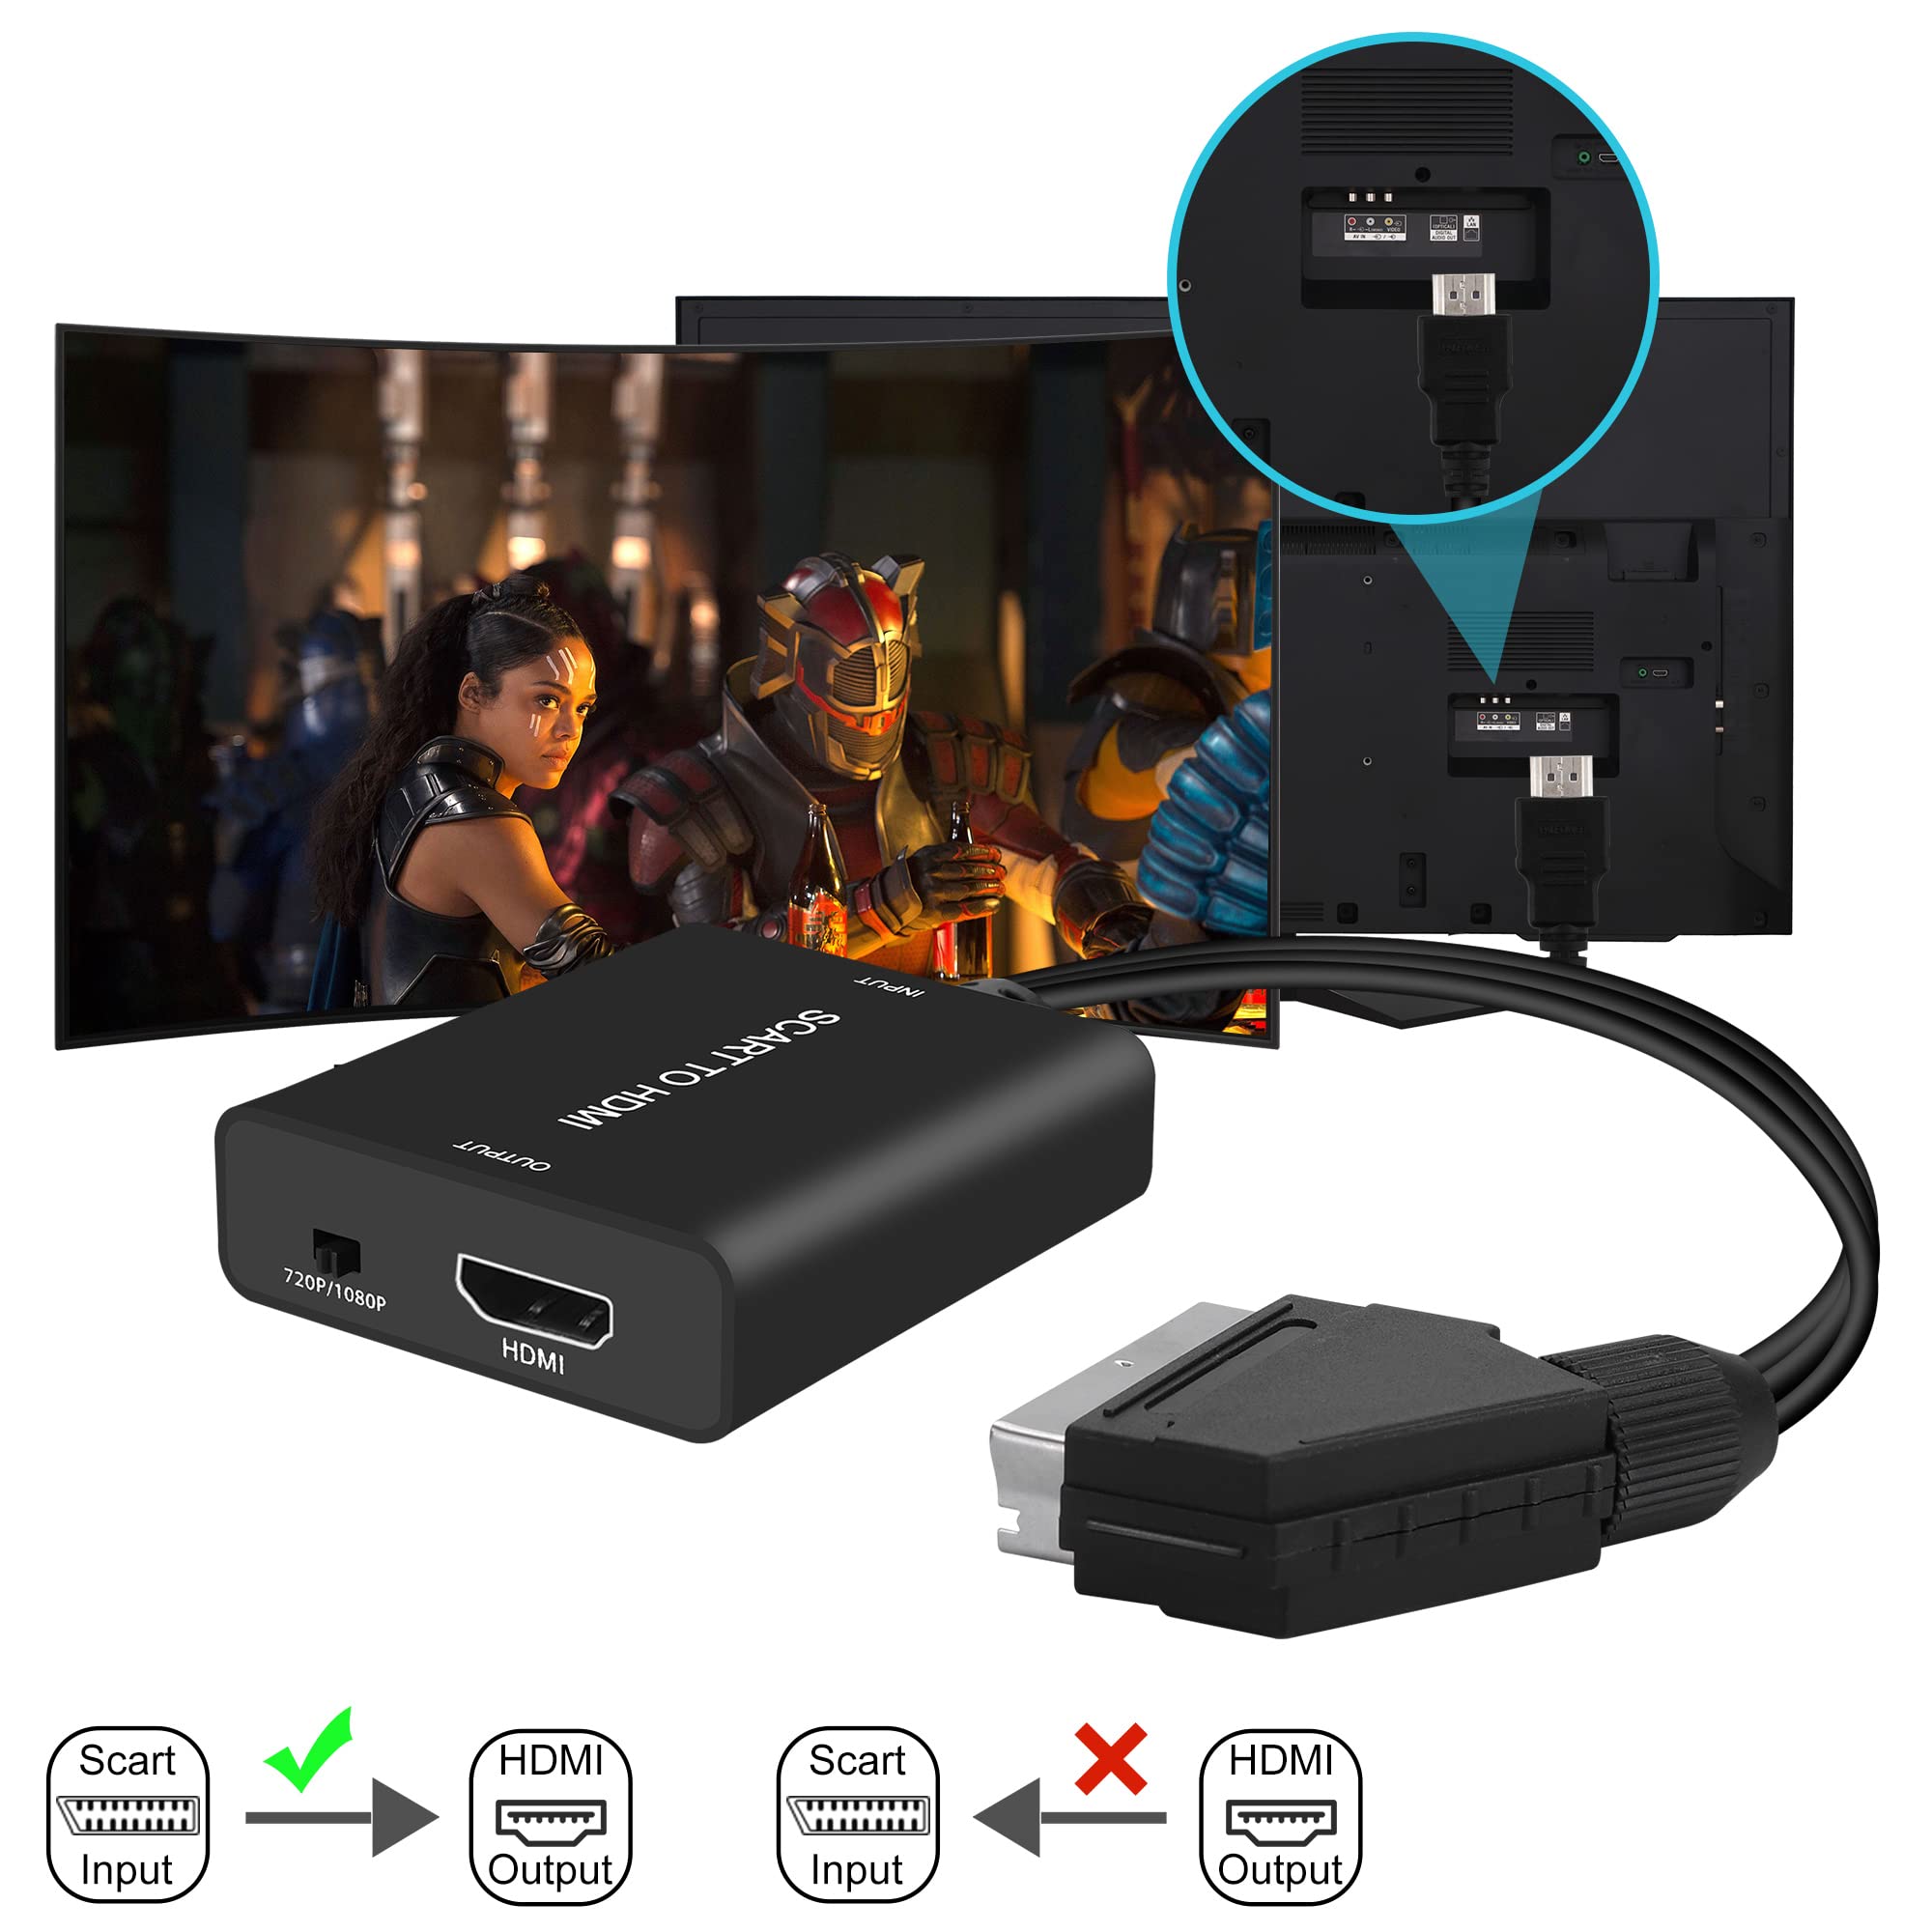 Scart to HDMI Converter with HDMI Cable, Scart to HDMI Full HD 720P/1080P Switch Video Audio Converter for HDTV Monitor Projector STB VHS Xbox PS3 Sky Blu-ray DVD Player